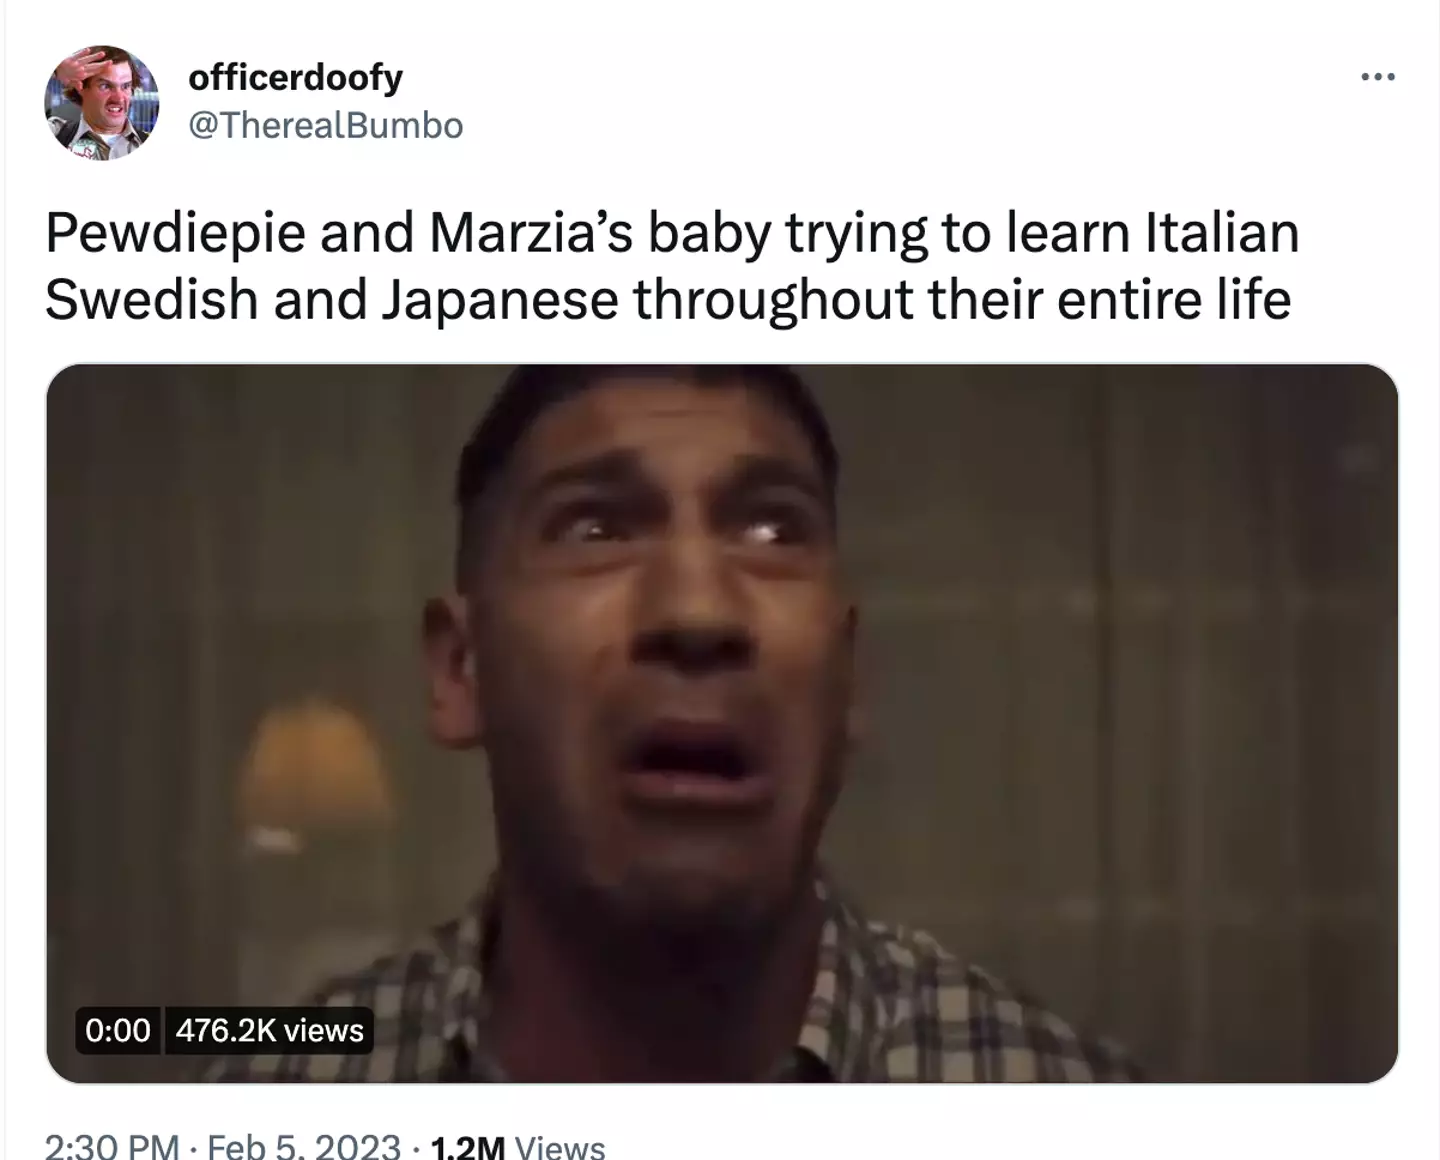 Fans have joked about the baby's confusion over languages.